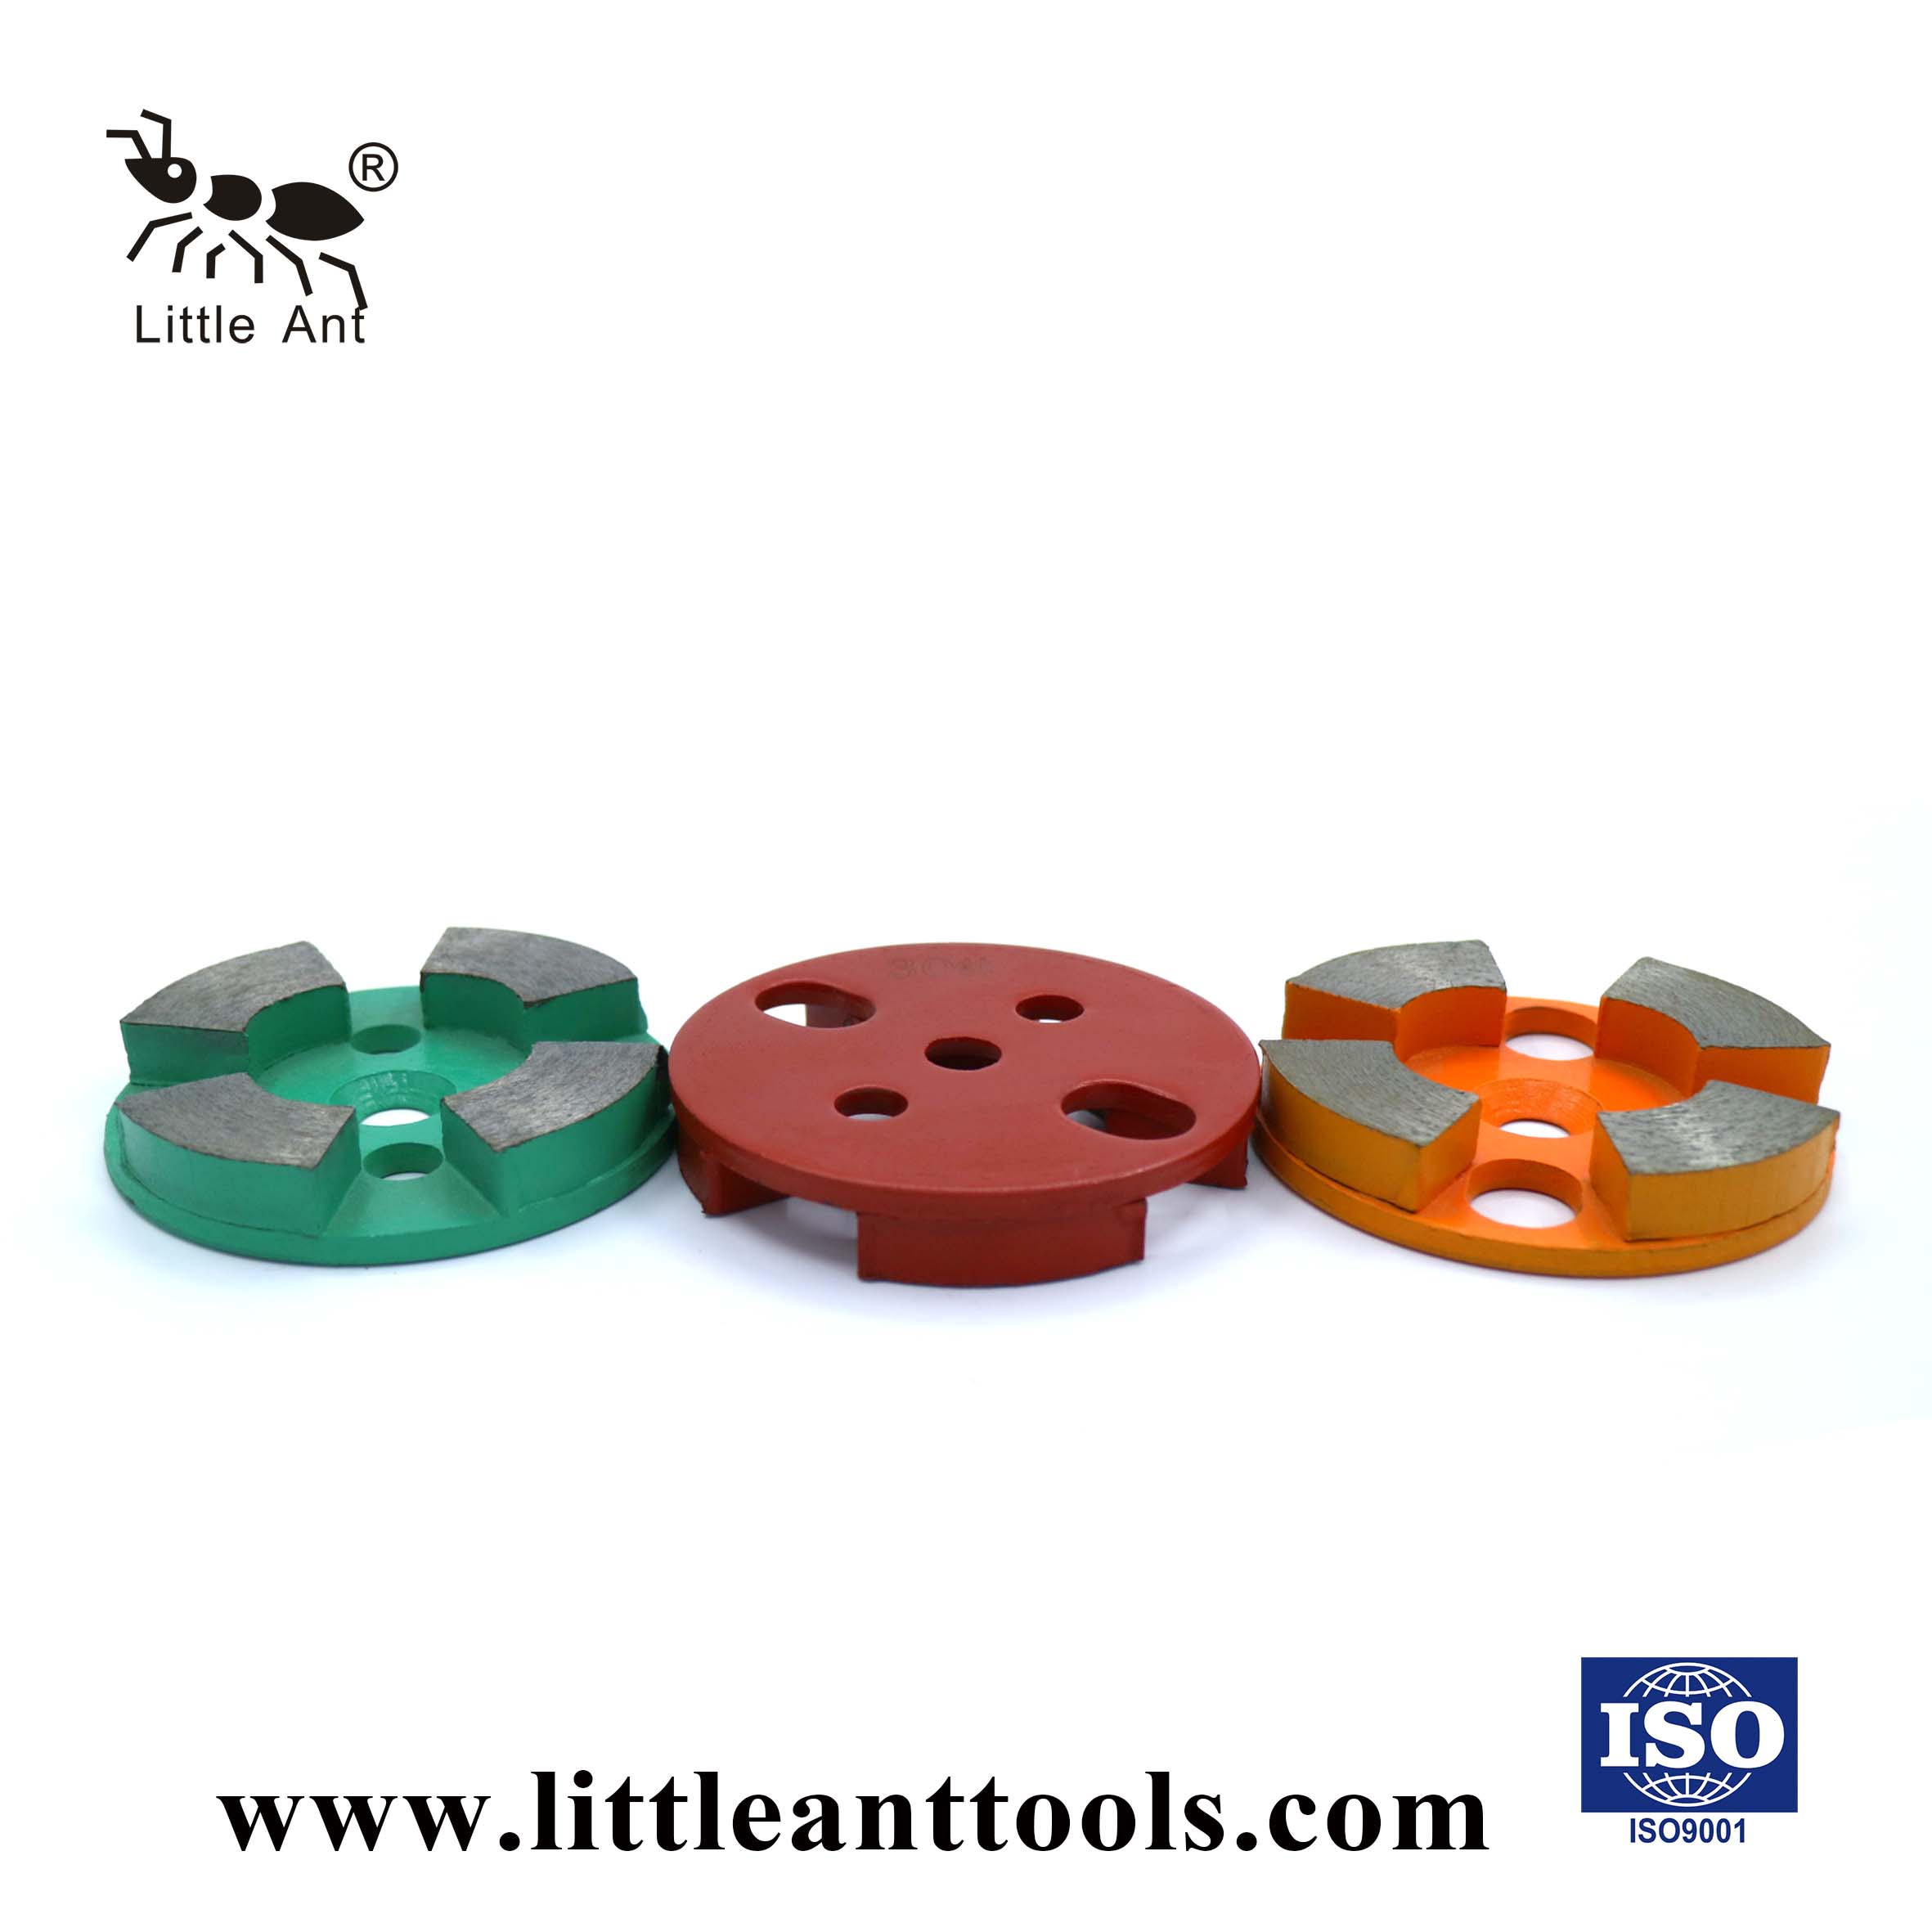 LITTLE ANT Circular Metal Grinding Plate for Concrete Sector Segemnt Dry And Wet Use Coarse